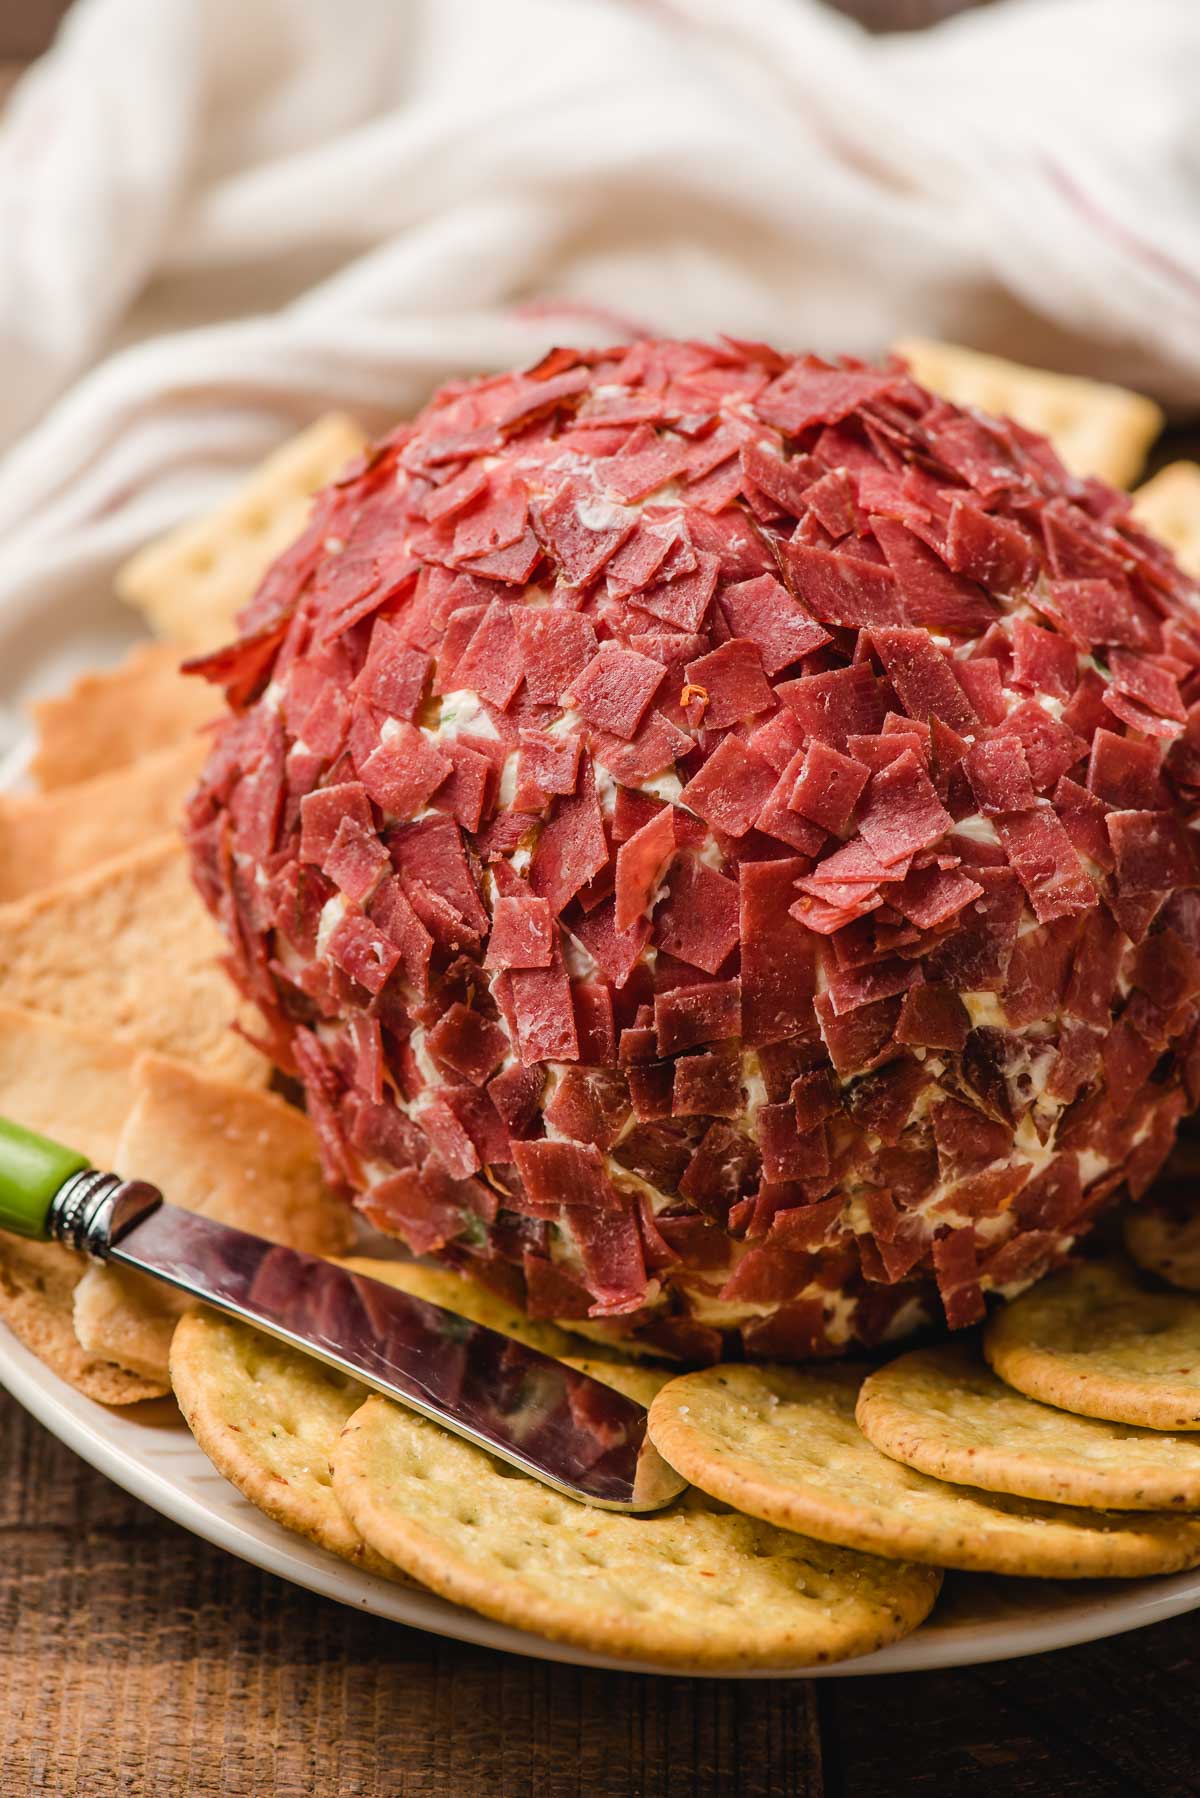 Cheeseball with chipped beef on a plate with crackers and a cheese knife.